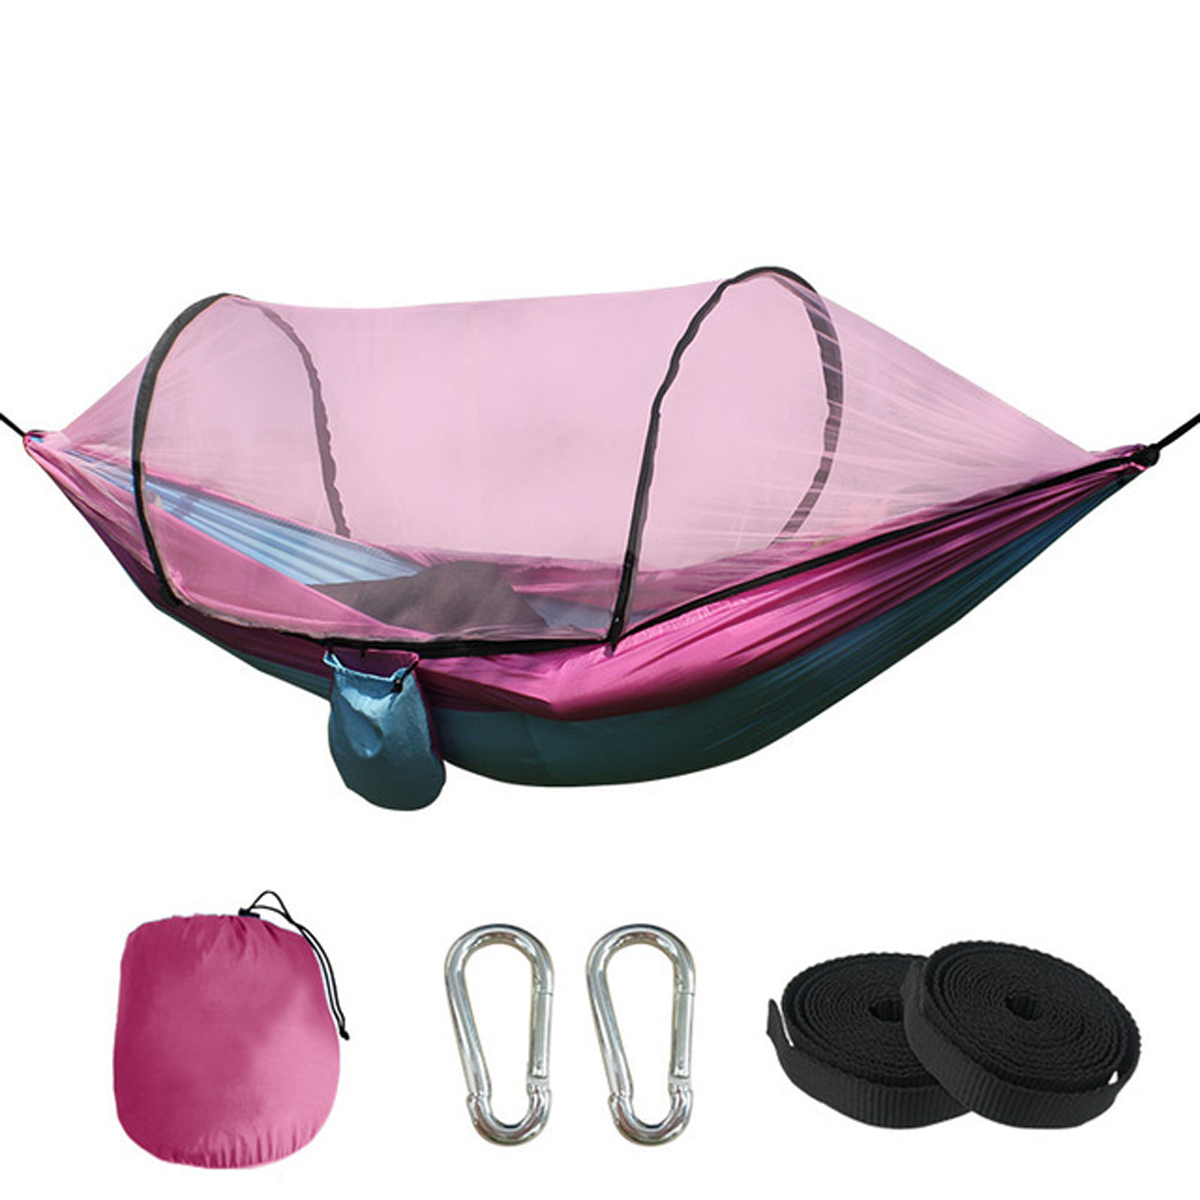 1-2-People-Camping-Hammock-with-Mosquito-Net-Lightweight-Hanging-Bed-Beach-Travel-Max-Load-300kg-1697049-10